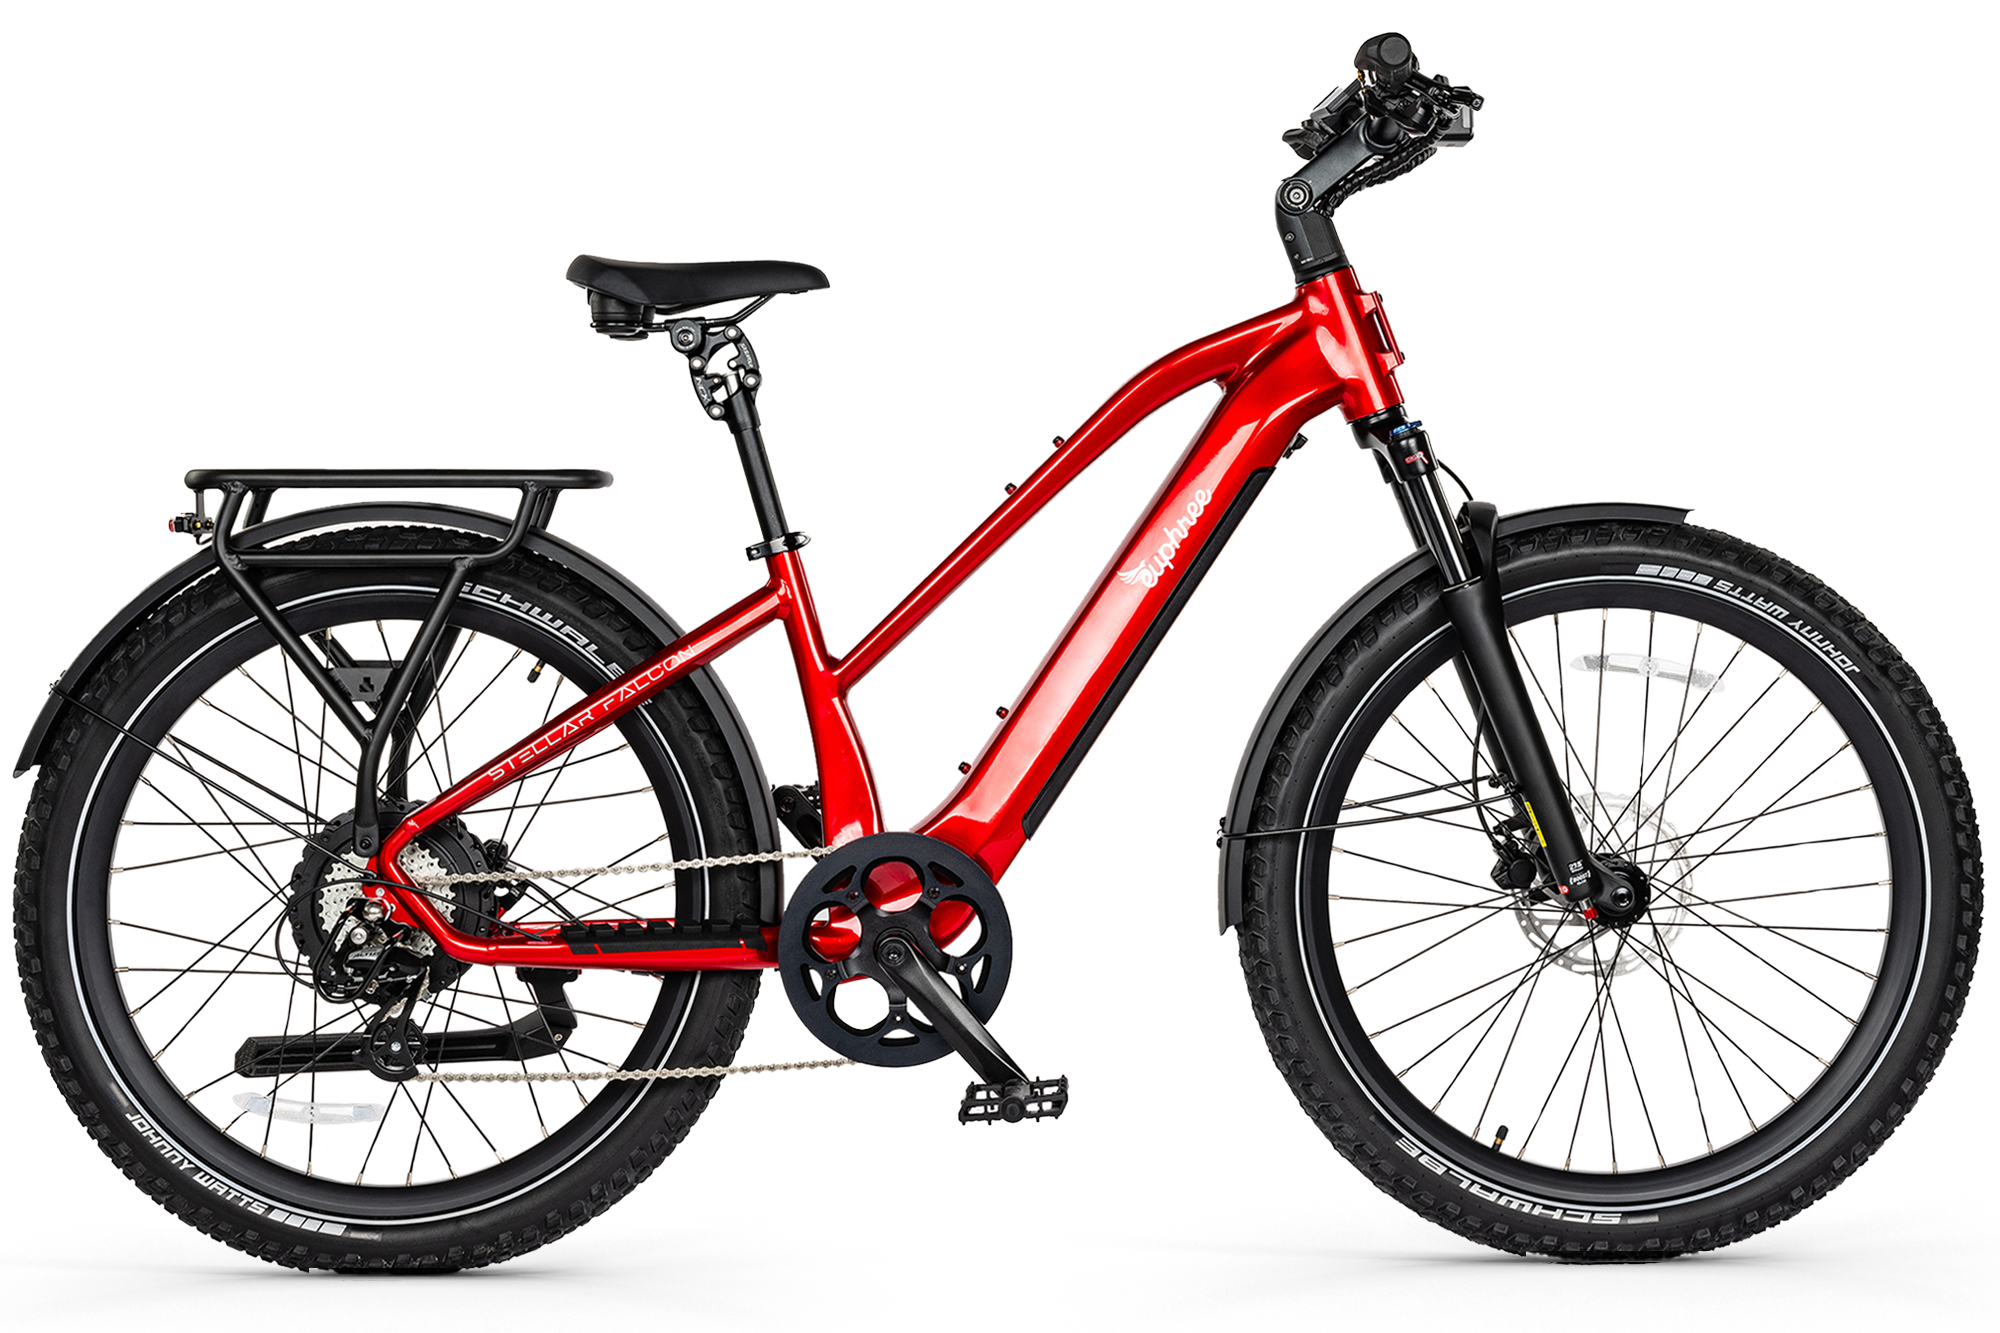 Bold Crimson Comet Red Euphree Stellar Falcon electric bike, highlighting its dynamic color and durable build, ready to tackle any journey with style and performance.